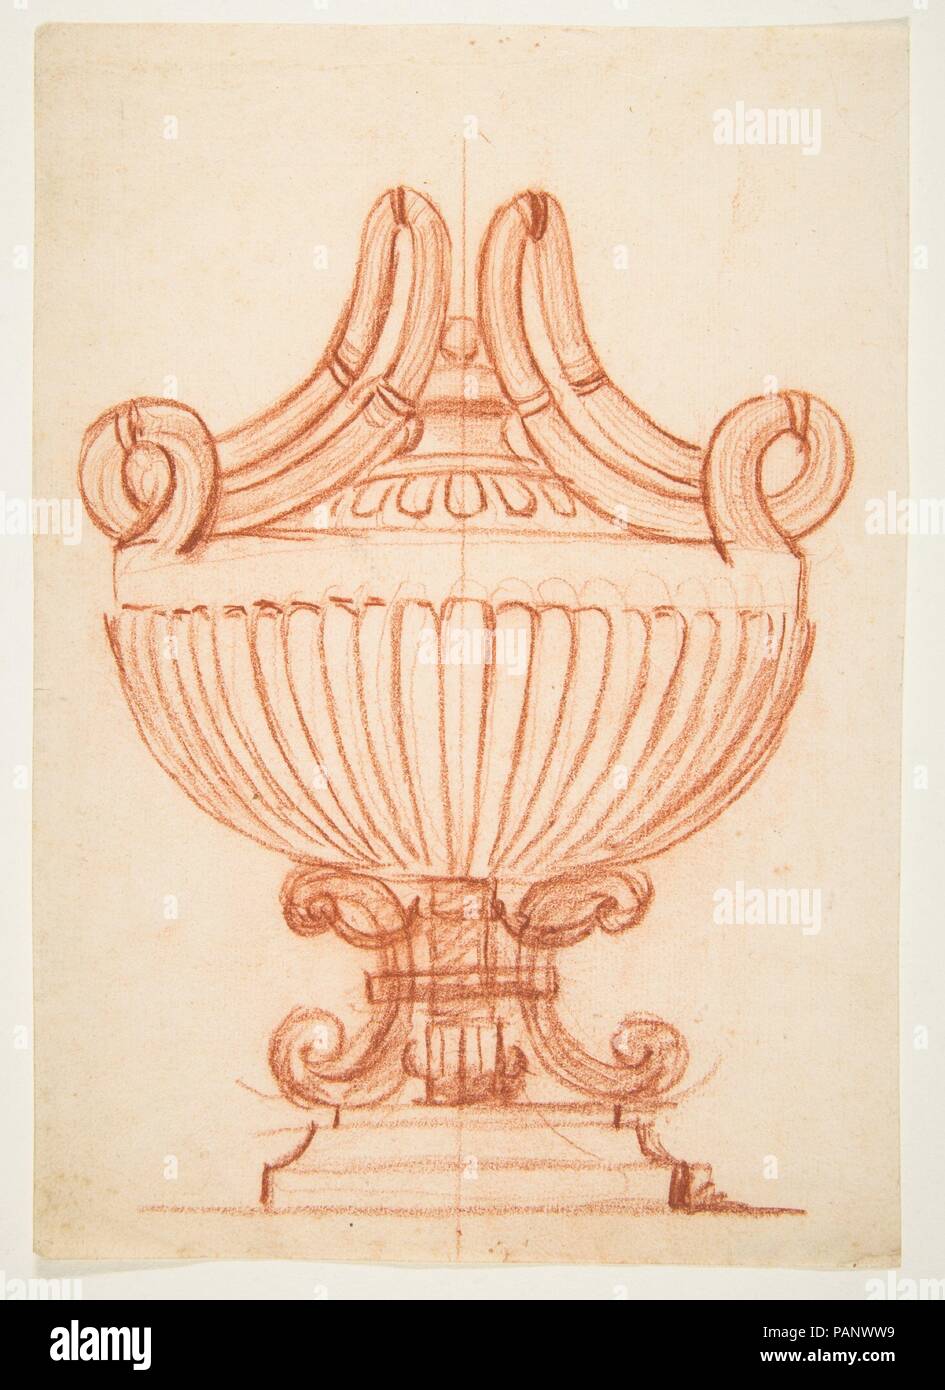 Design for a Covered Vase. Artist: Attributed to Anonymous, French, 18th century. Dimensions: sheet: 7 1/8 x 5 3/8 in. (18.1 x 13.7 cm)  sheet: 8 1/2 x 6 in. (21.6 x 15.2 cm). Date: 18th century. Museum: Metropolitan Museum of Art, New York, USA. Stock Photo